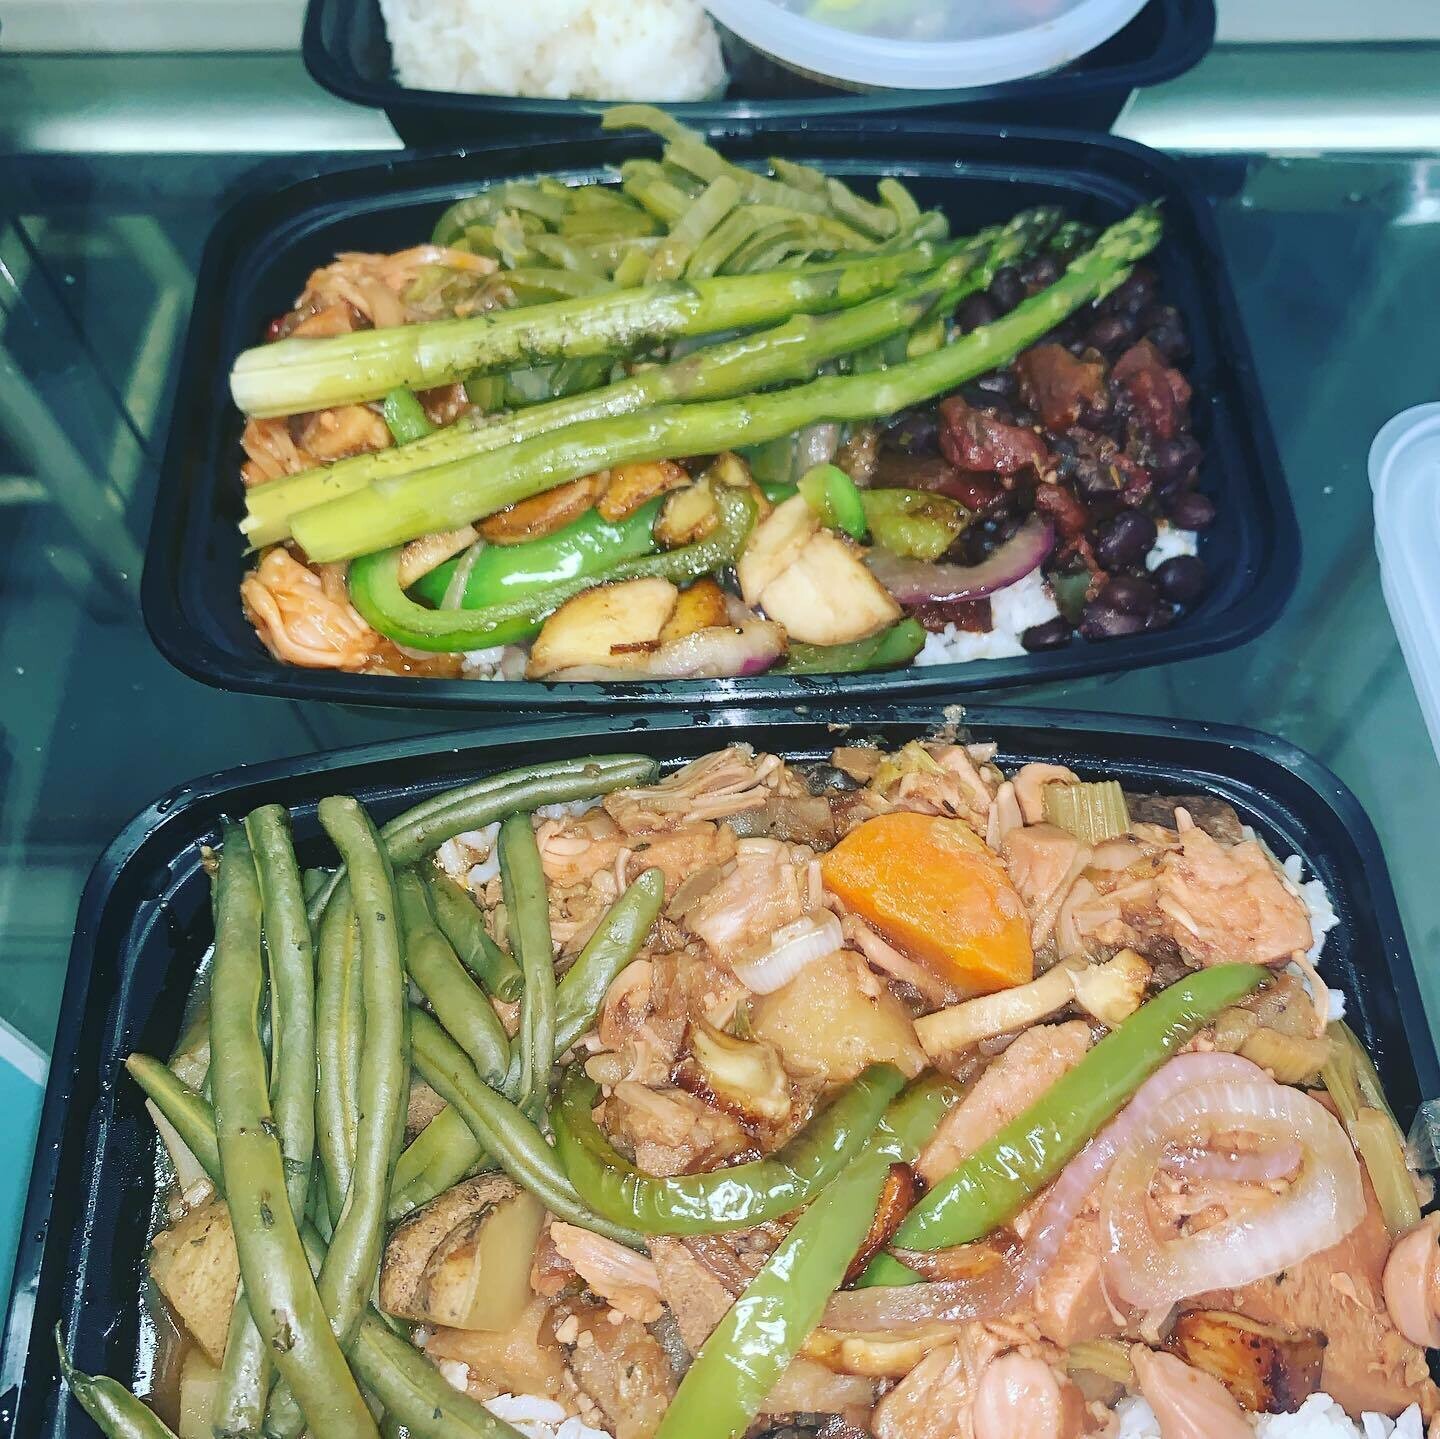 3 Days - 2 Meals / Day